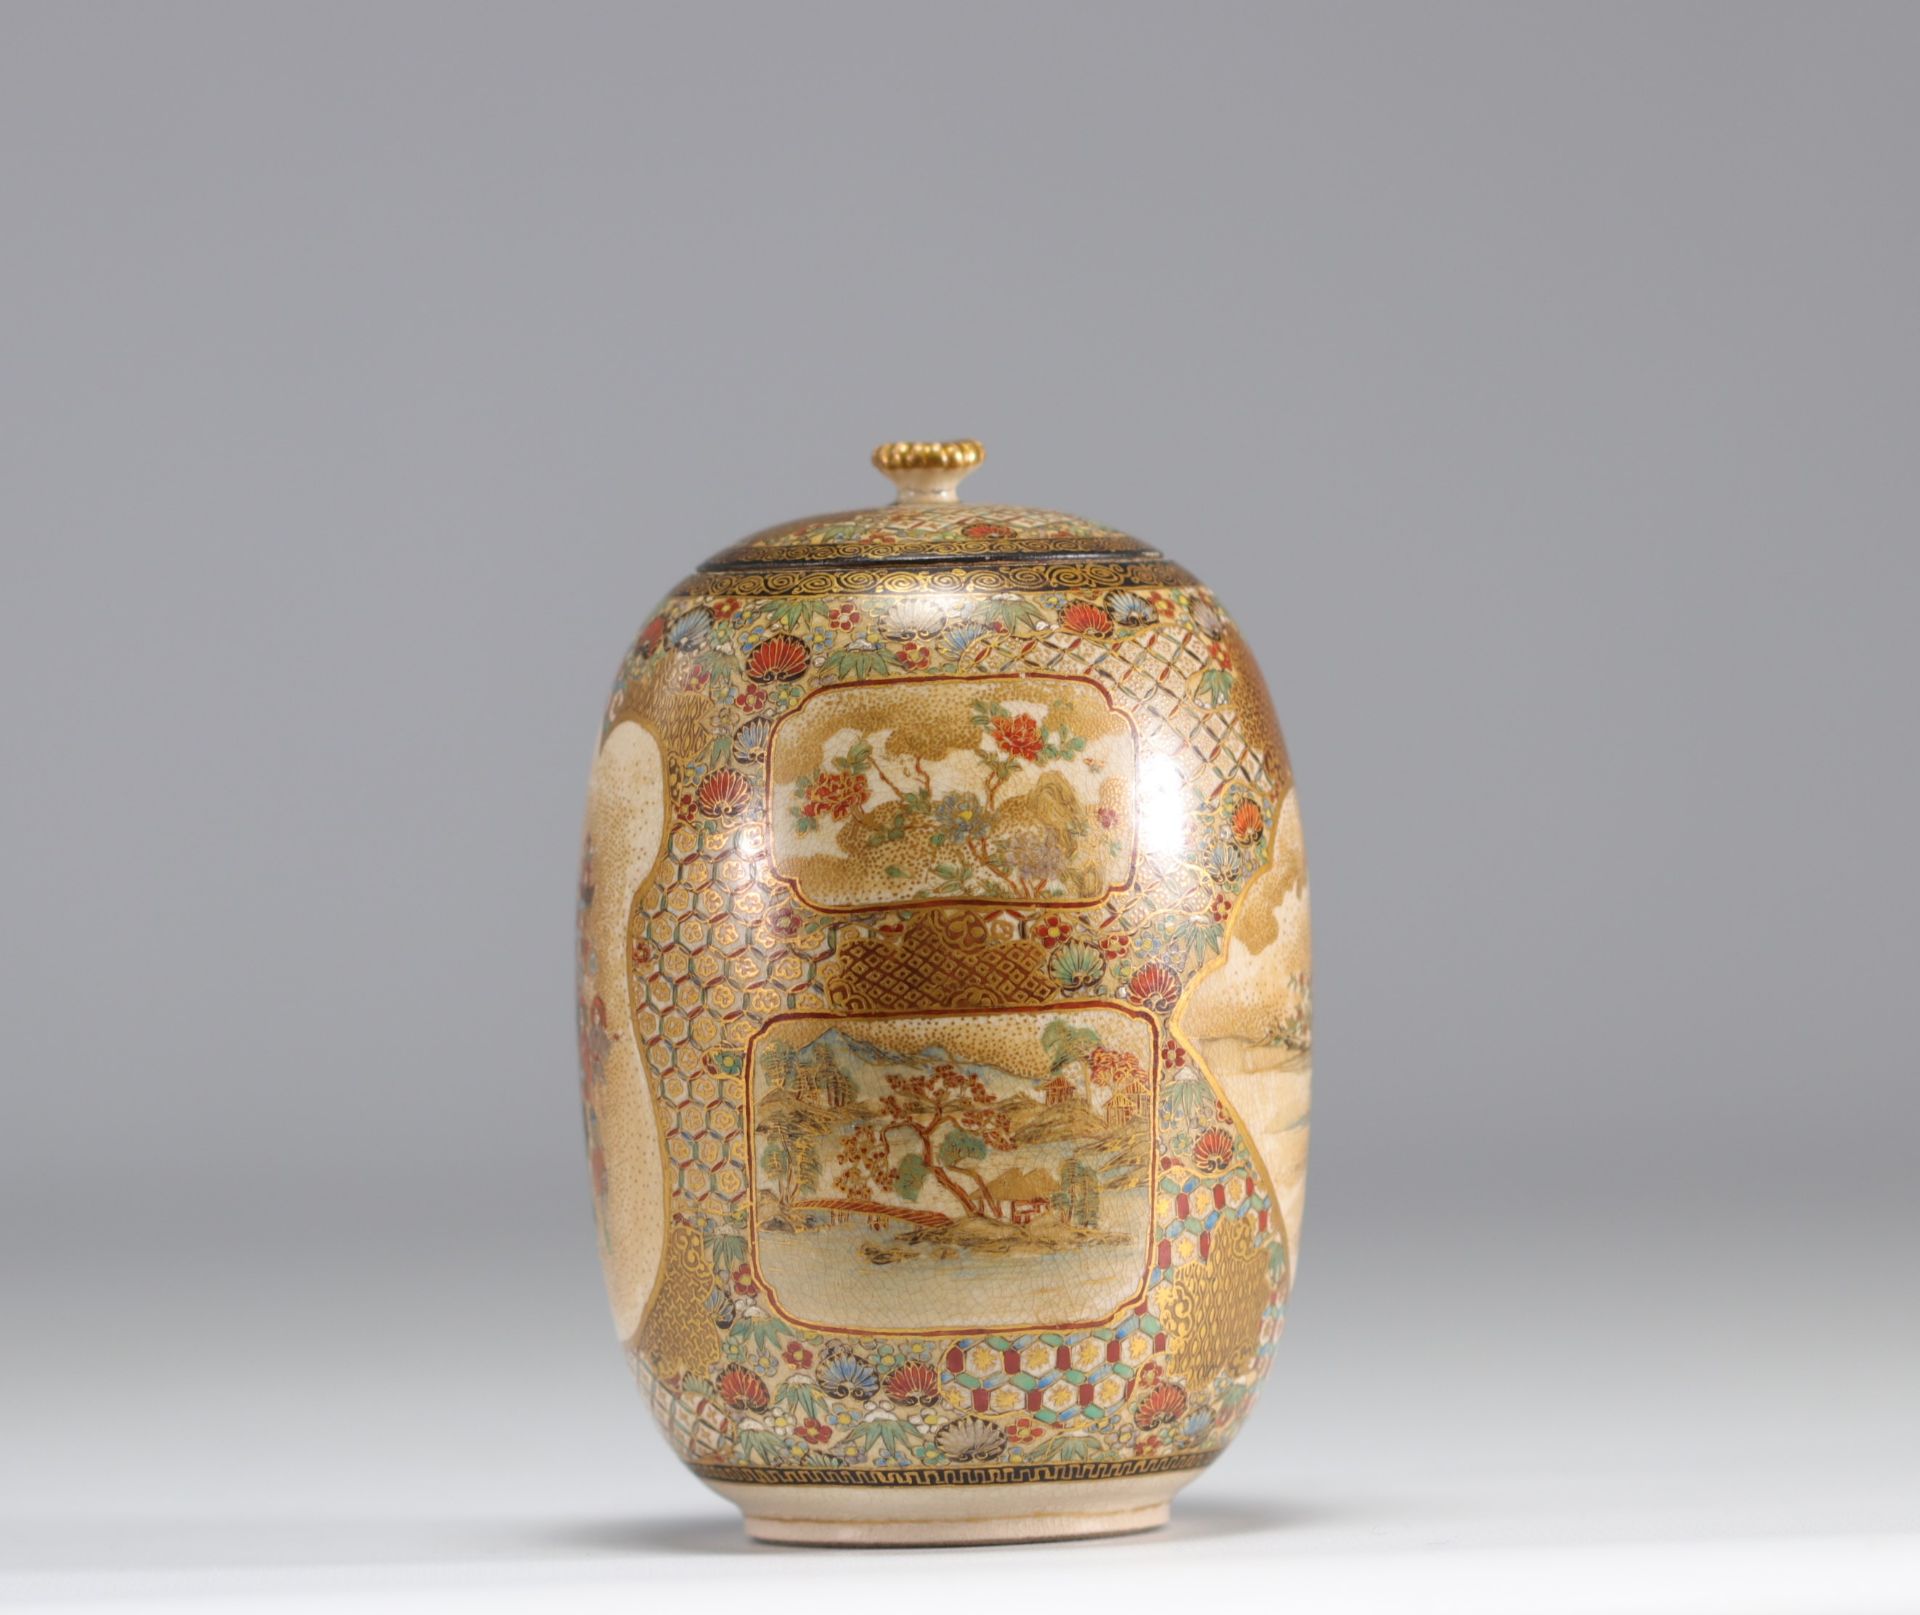 A beautiful enamel-decorated Satsuma covered vase with figures and flowers, circa late 19th century - Image 3 of 6